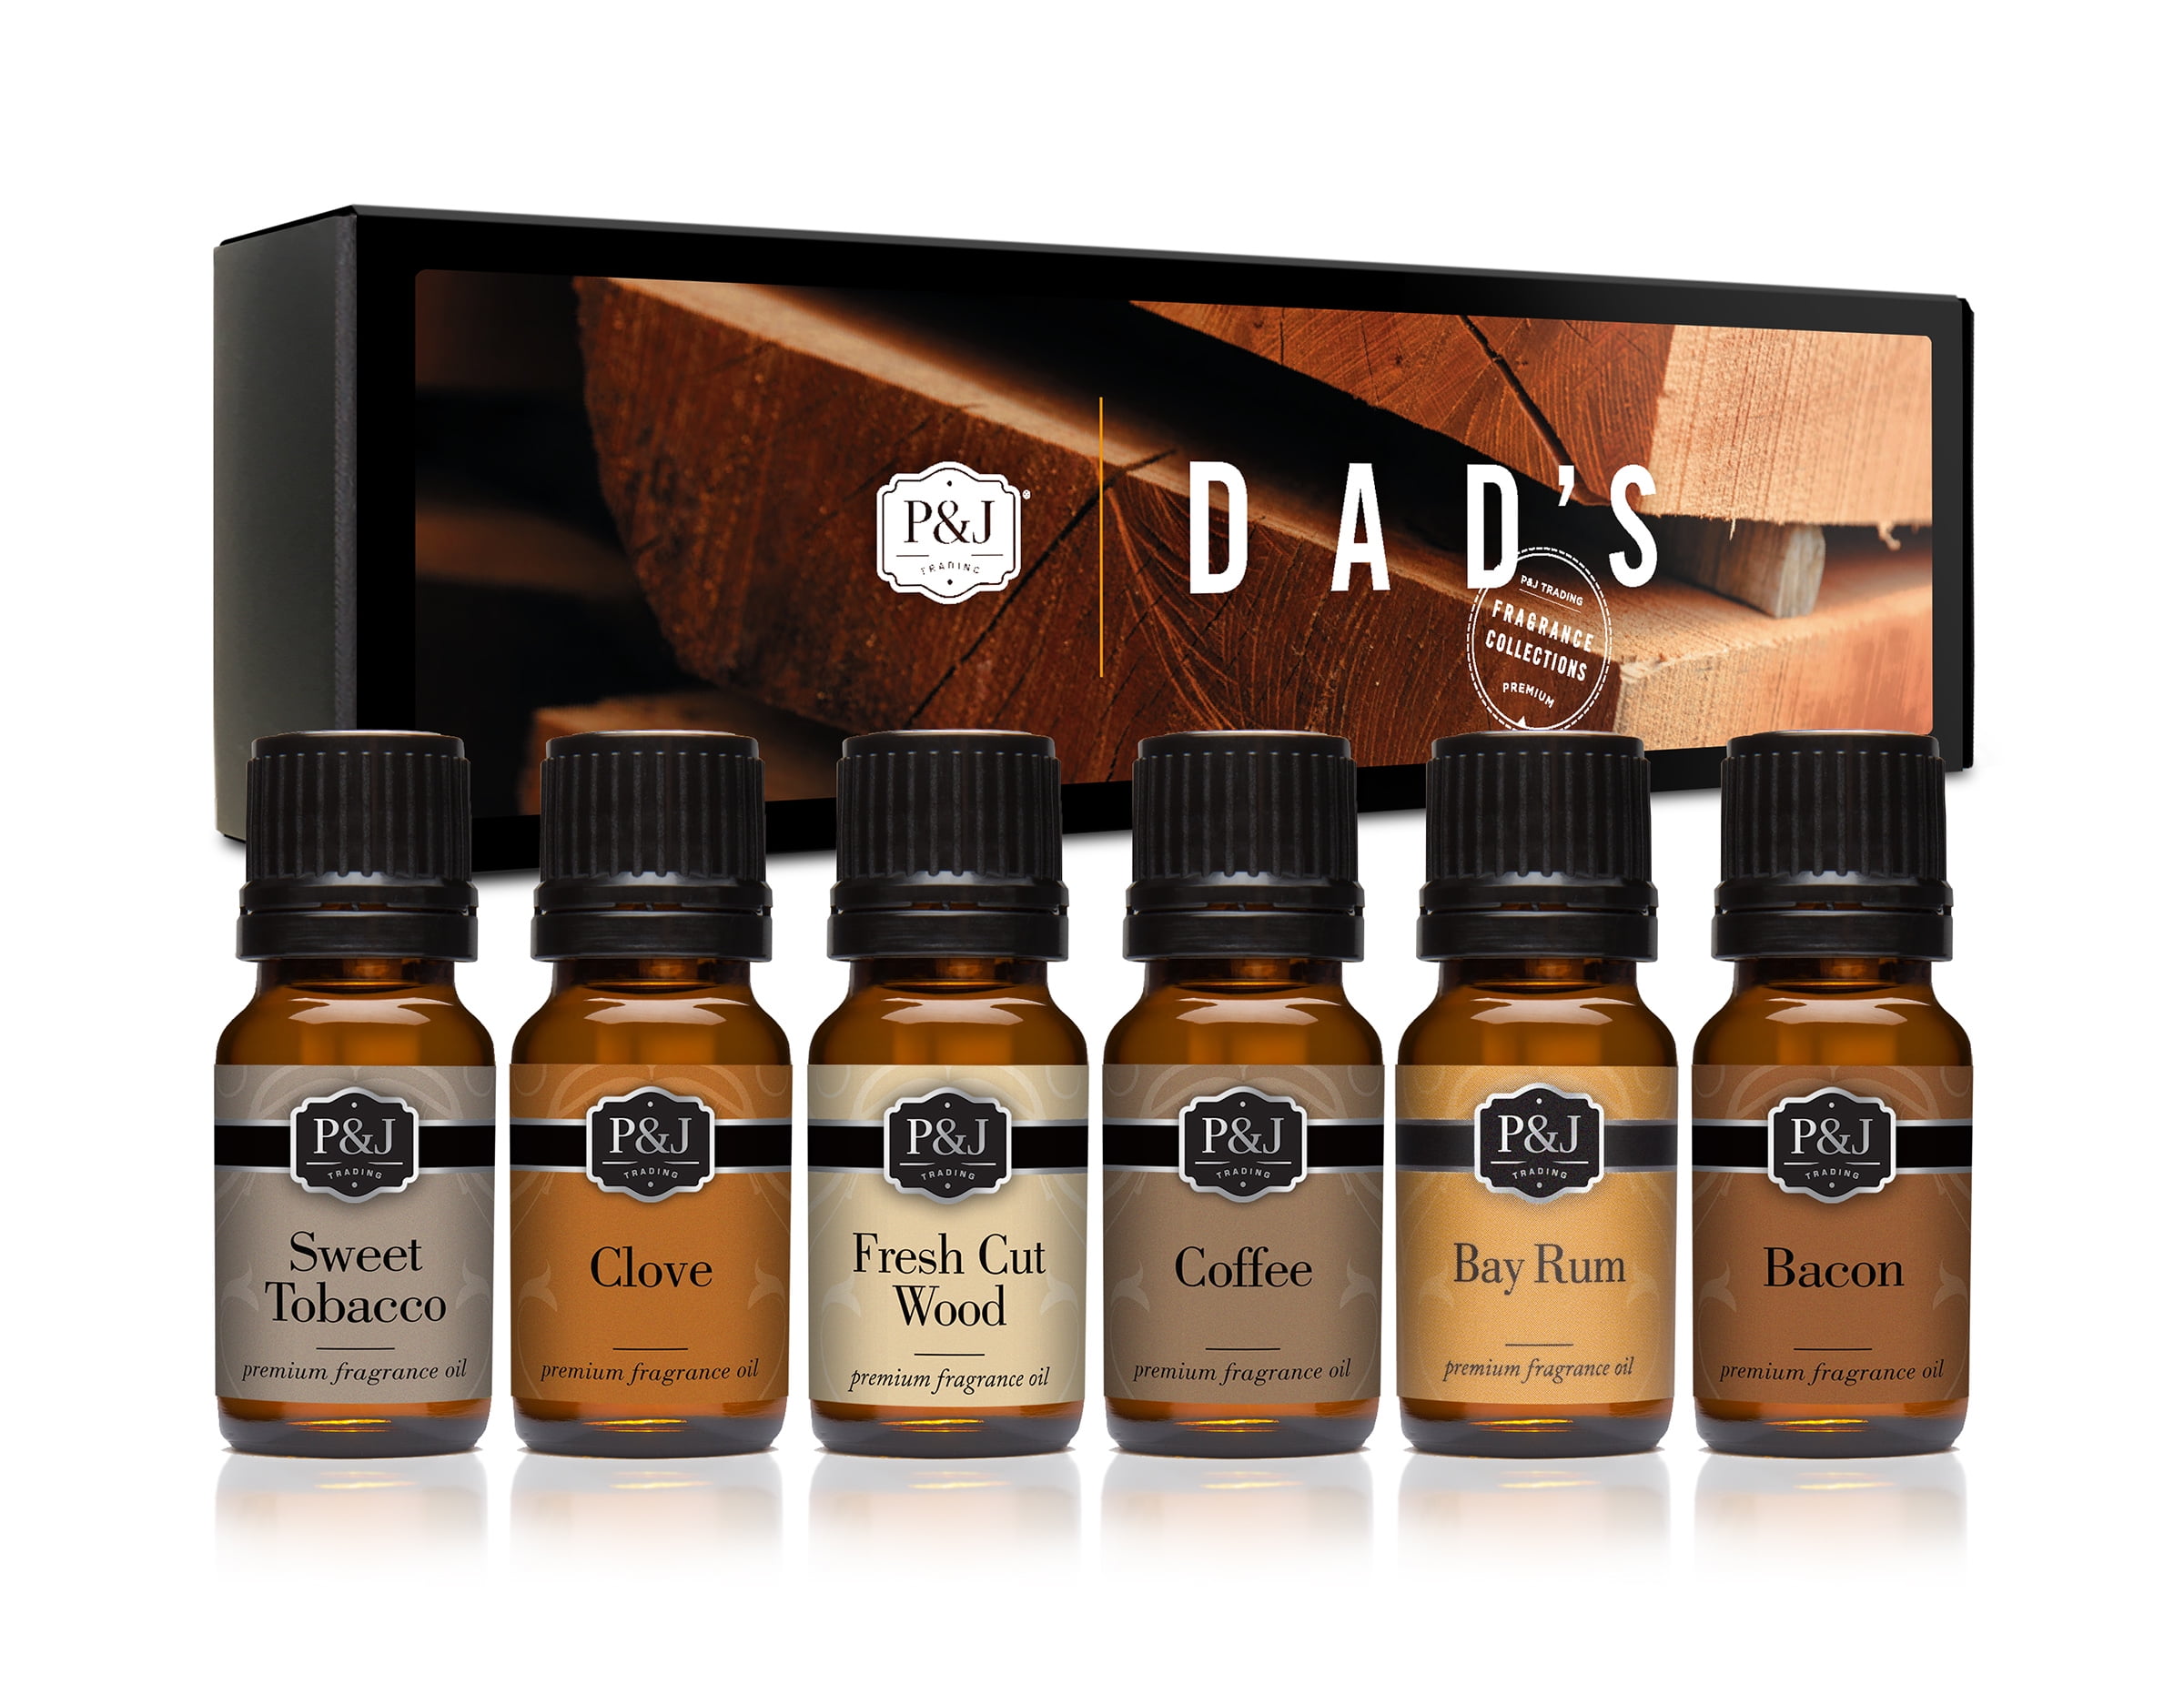 P&J Fragrance Oil  Dad's Set of 6 - Scented Oil for Soap Making,  Diffusers, Candle Making, Lotions, Haircare, Slime, and Home Fragrance 